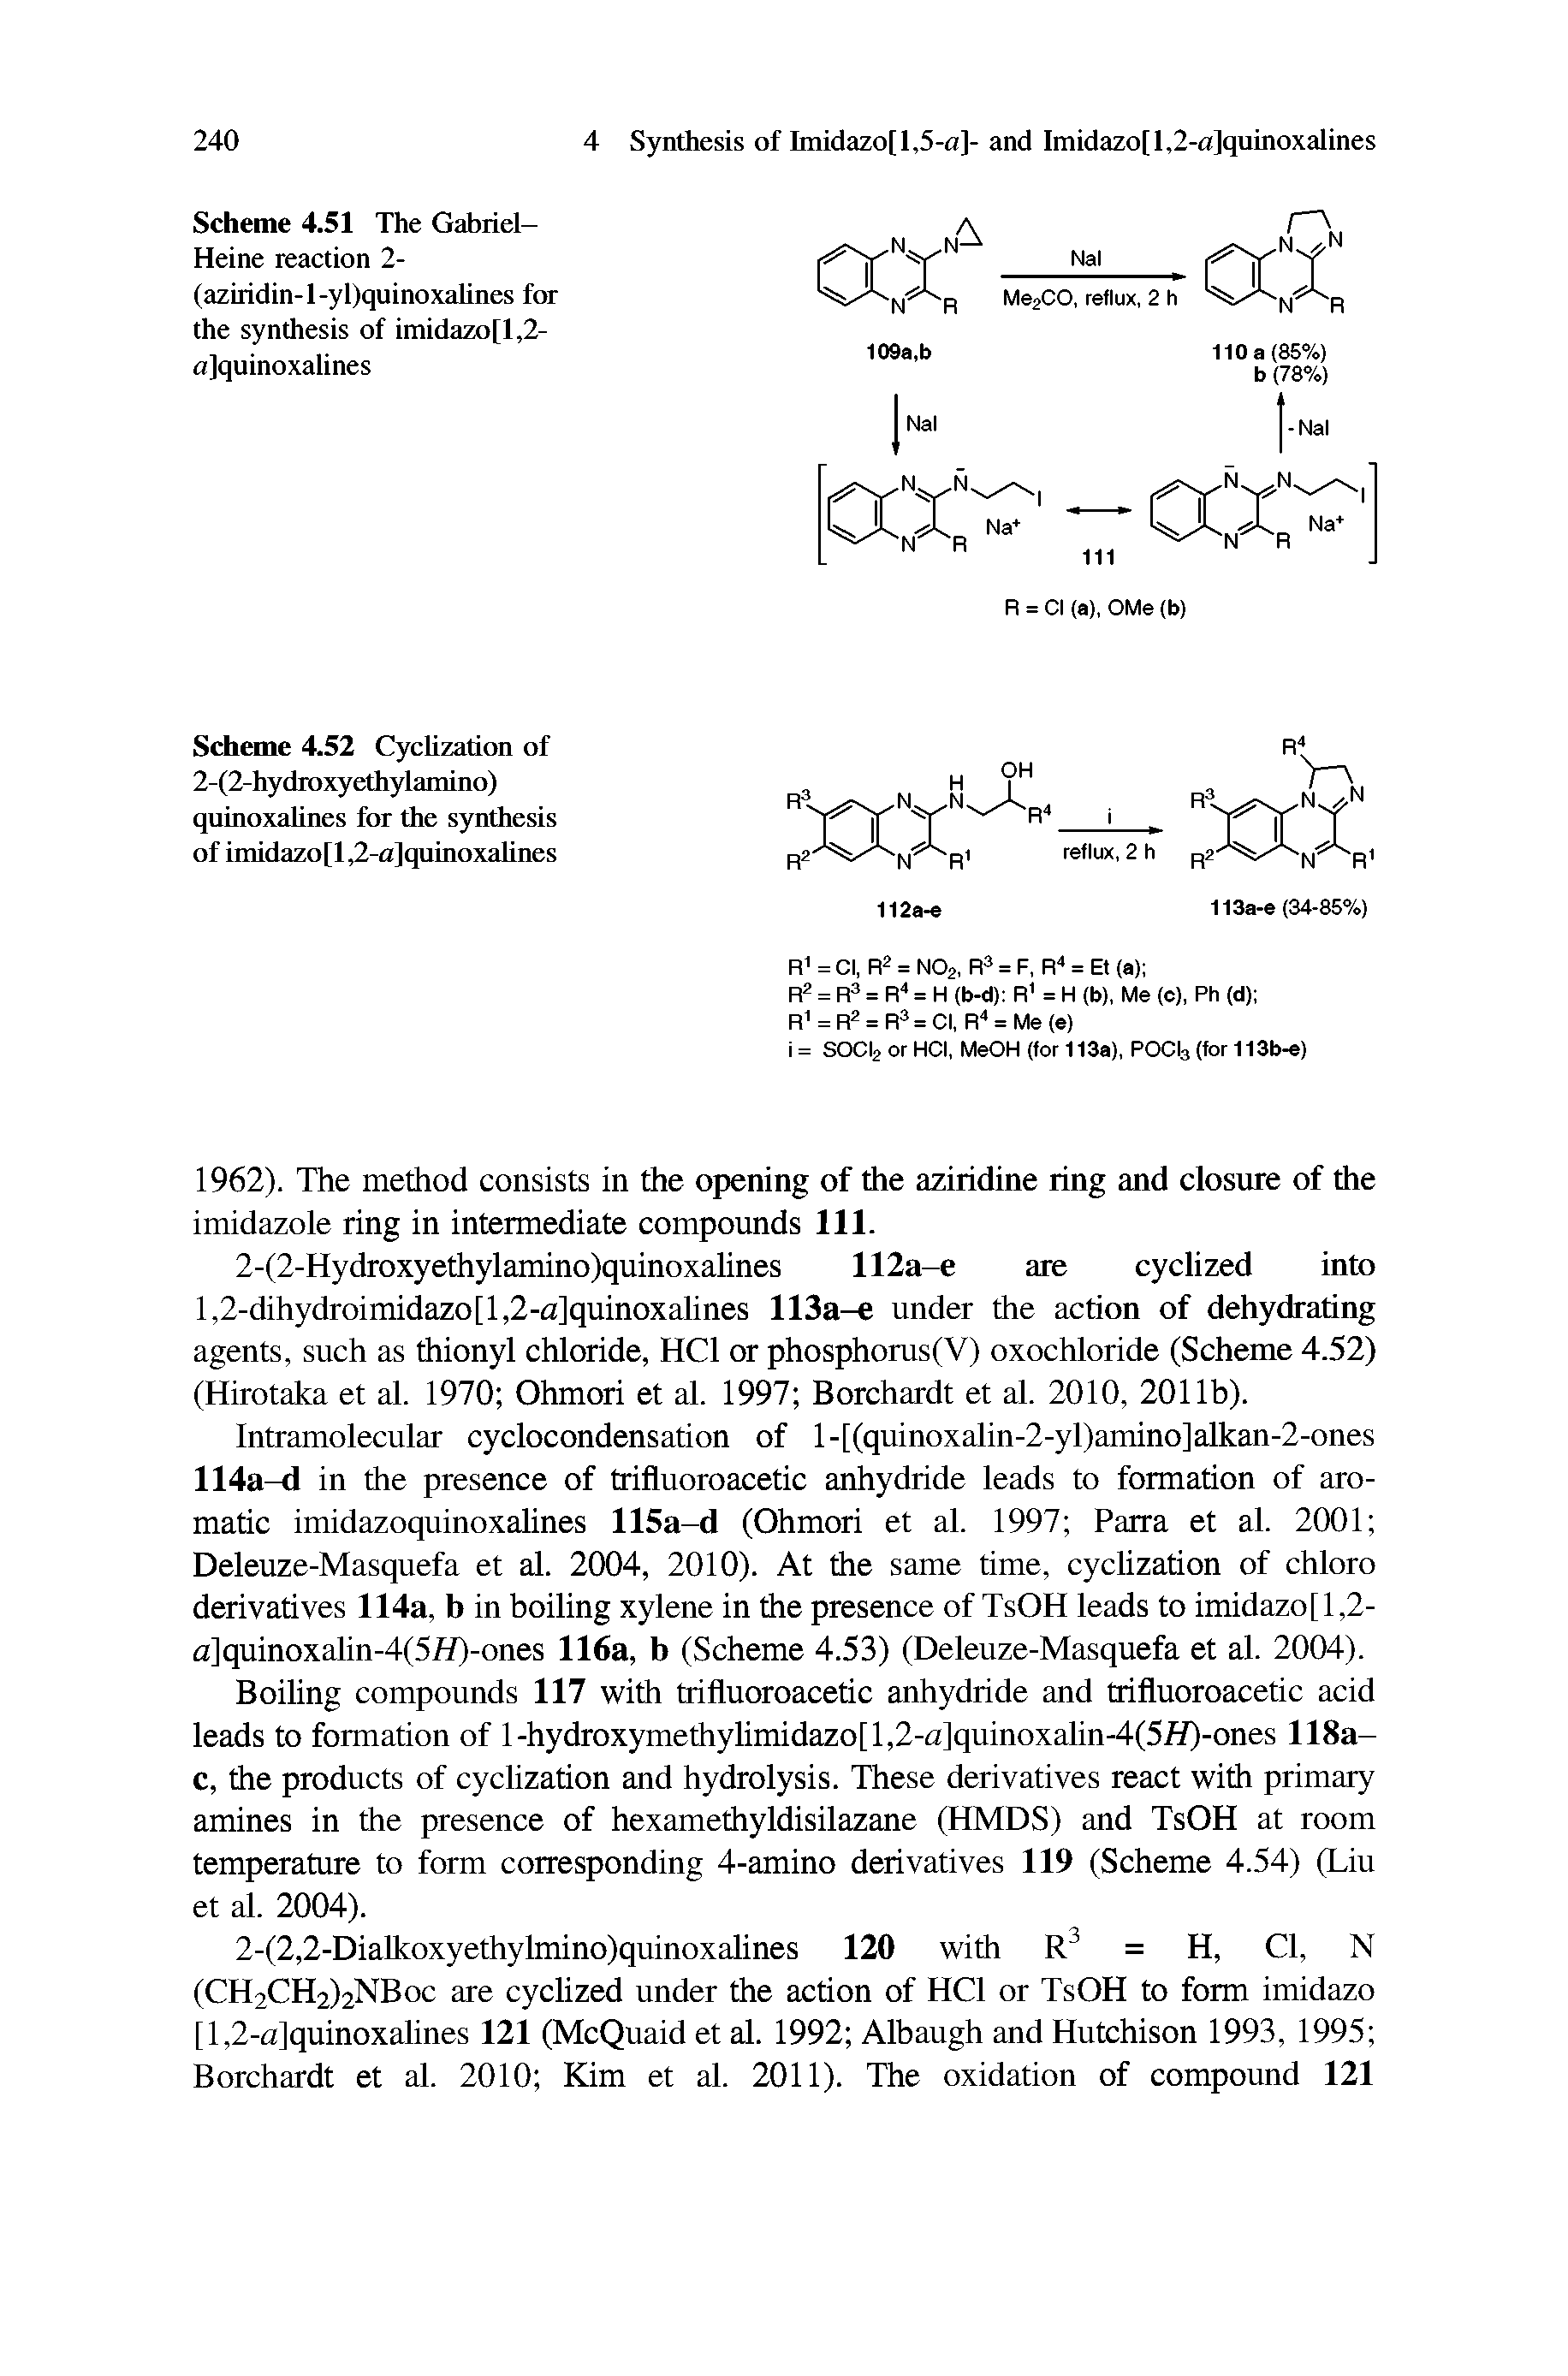 Scheme 4.51 The Gabriel-Heine reaction 2-(aziridin-l-yl)quinoxalines for the synthesis of imidazo[l,2-a]quinoxalines...